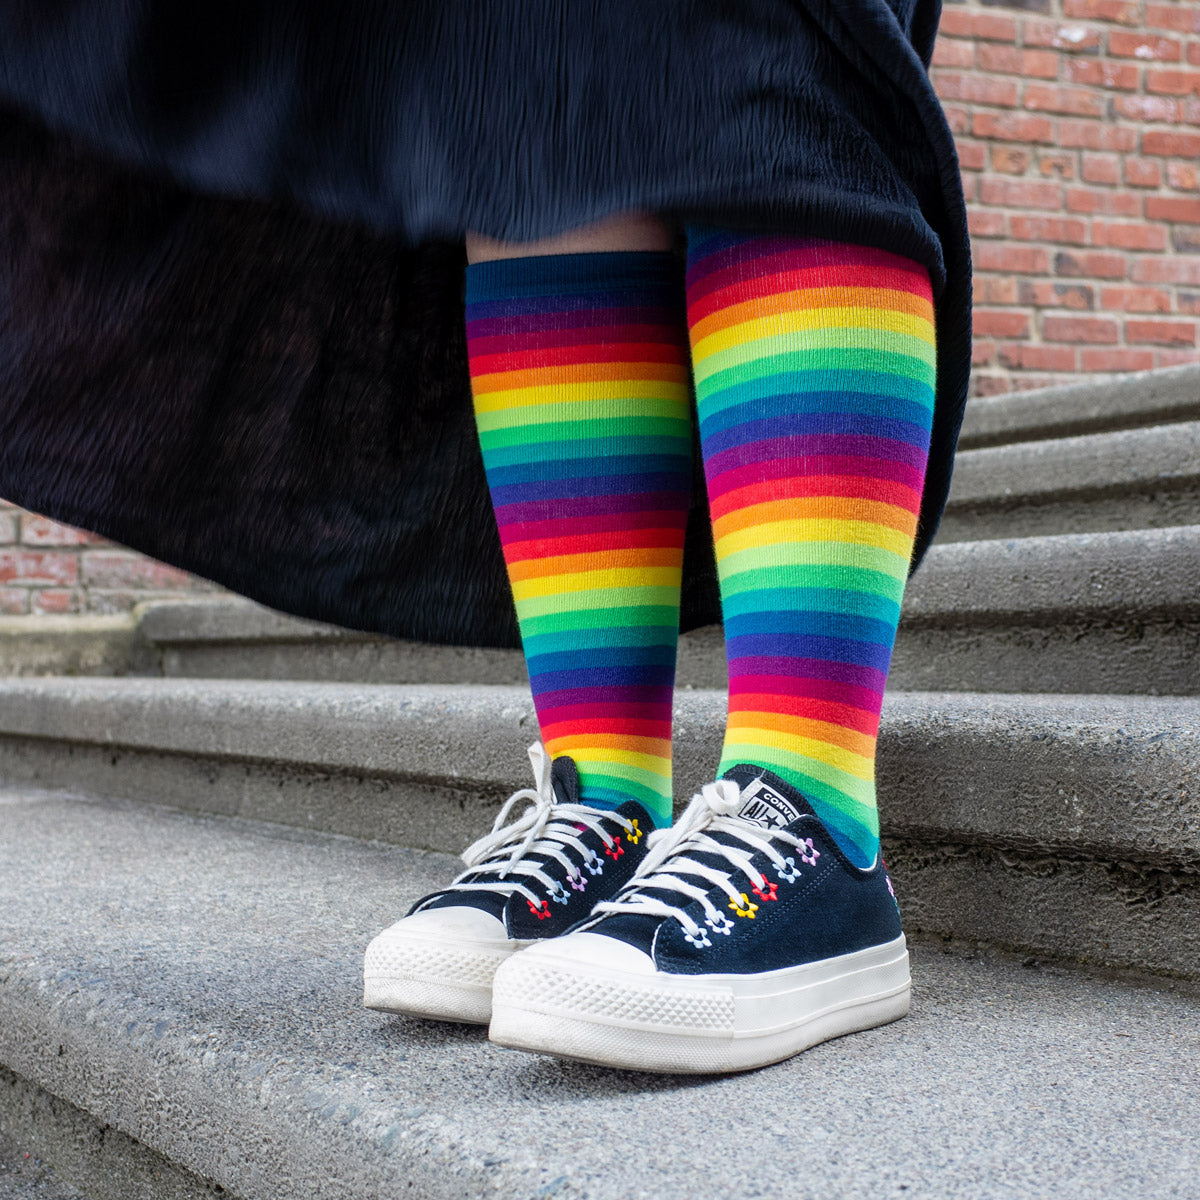 Rainbow gradient knee socks are worn with black and white Converse